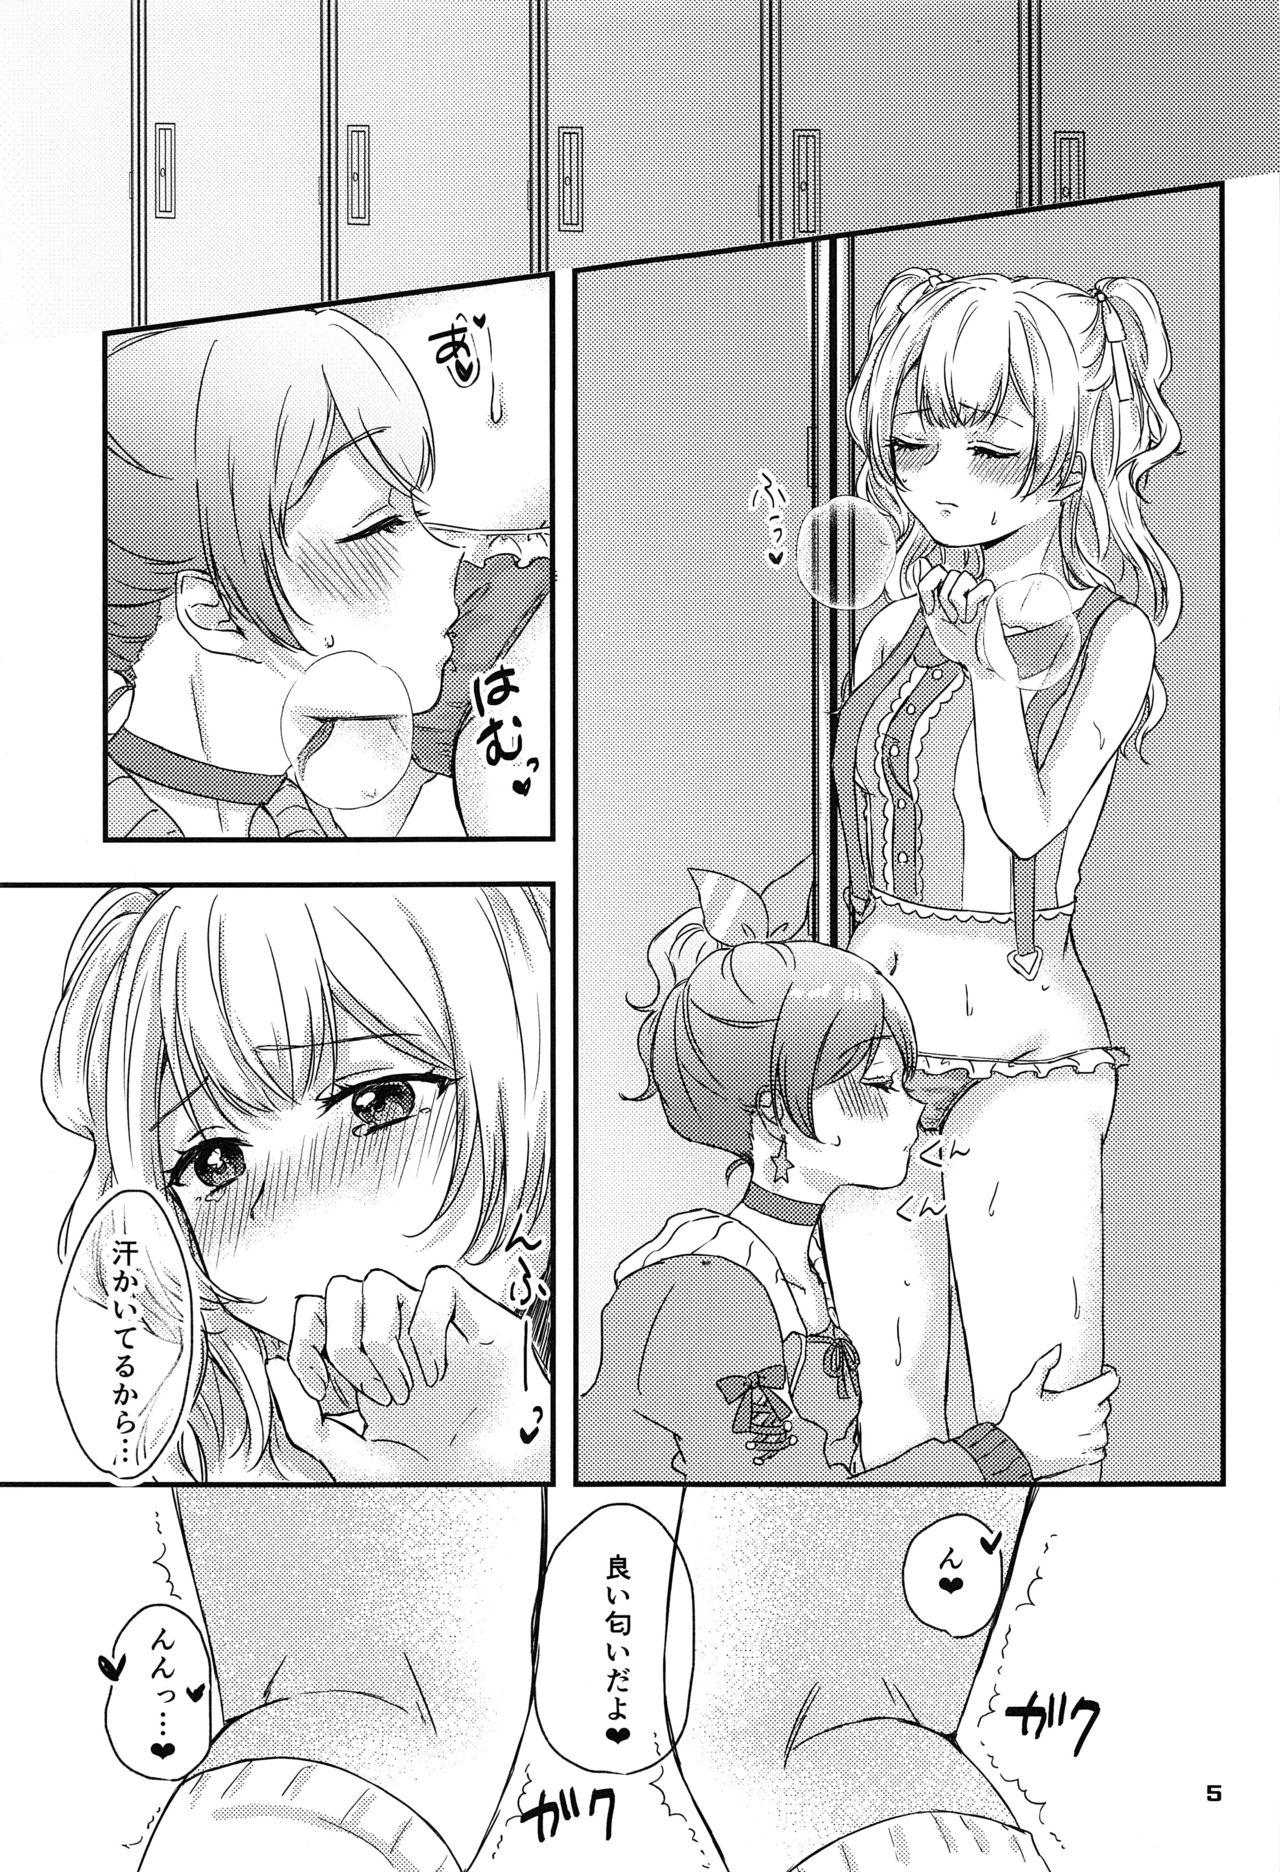 Caliente Sweet Costume Sex time. - Bang dream Shaven - Page 3